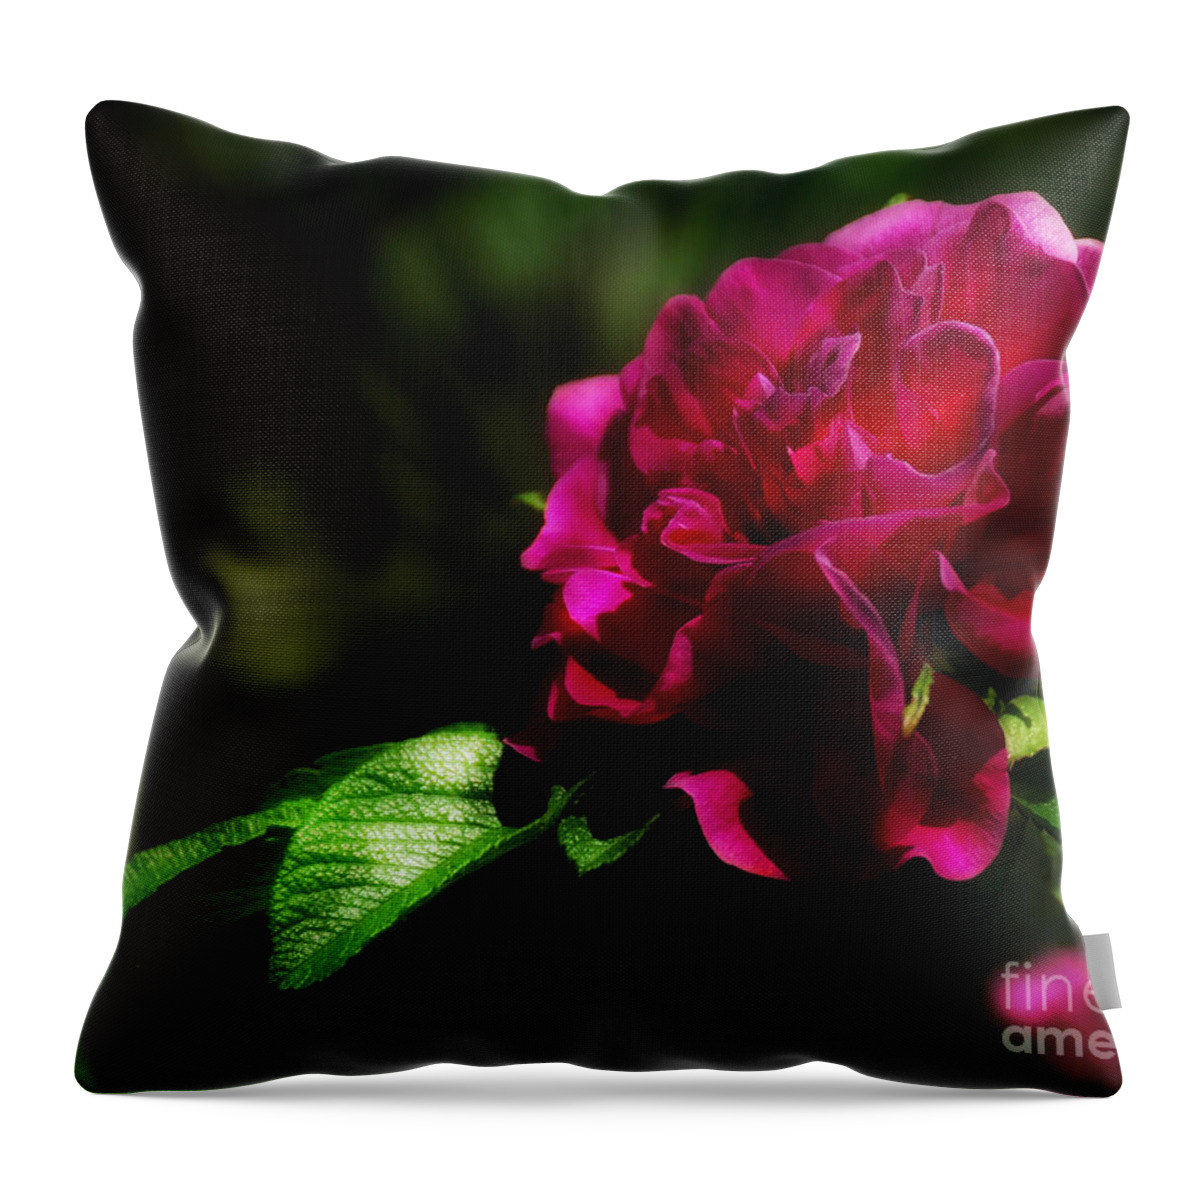 Flowers Throw Pillow featuring the photograph Summer Rose by Elaine Manley